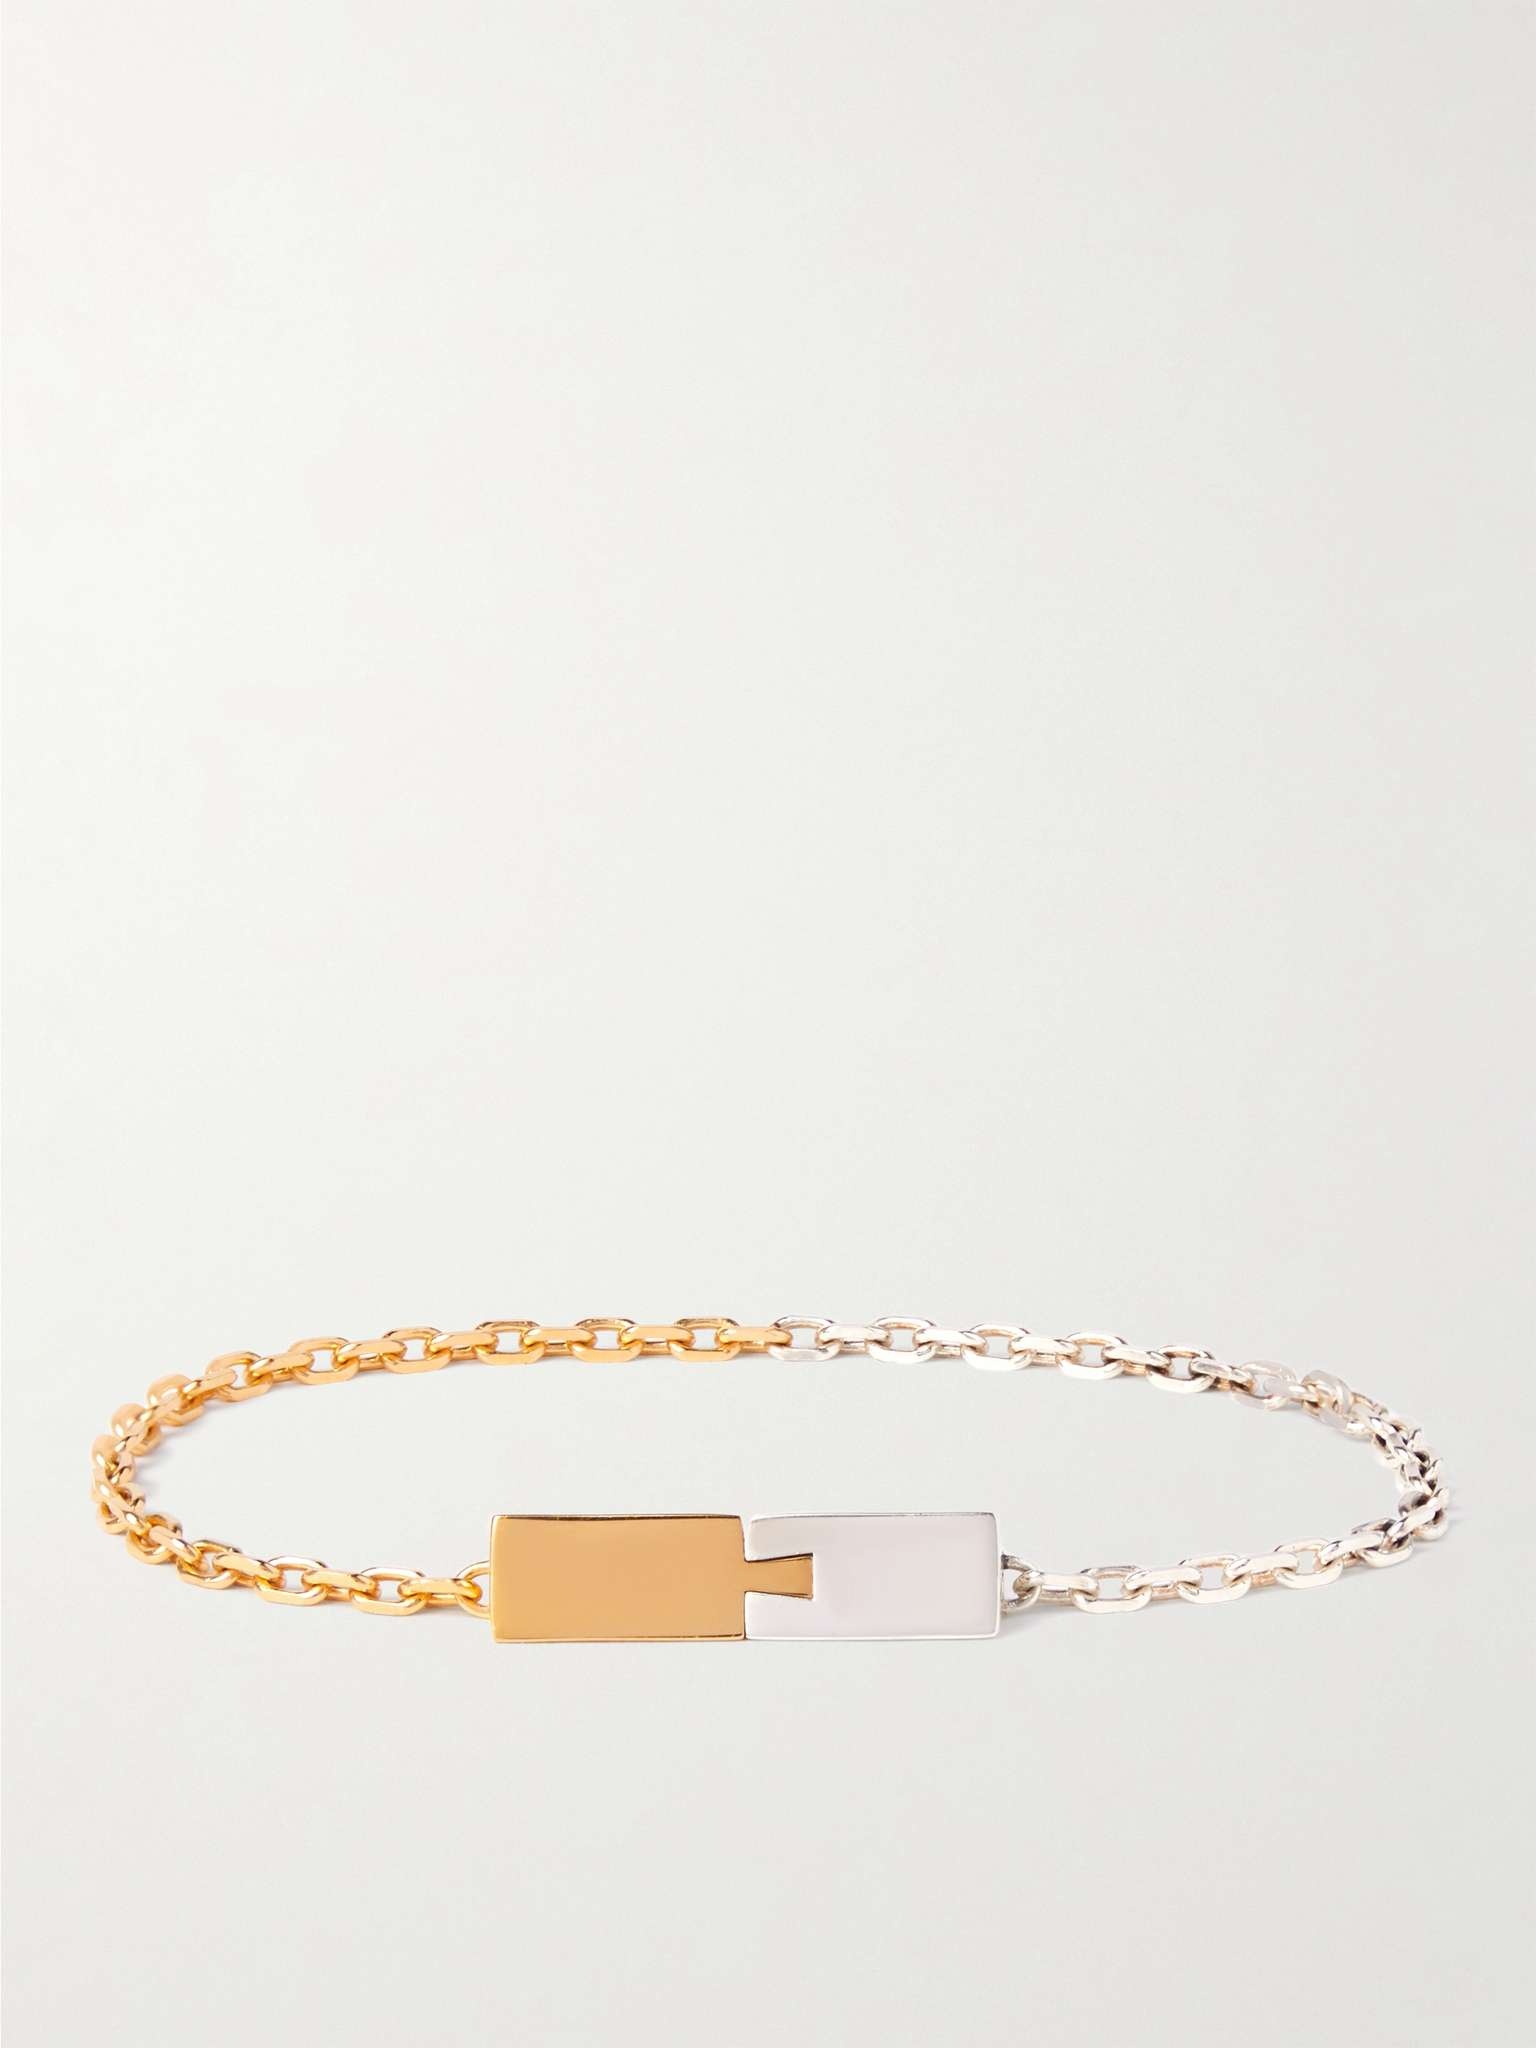 Gold Vermeil and Sterling Silver Chain Bracelet - 1